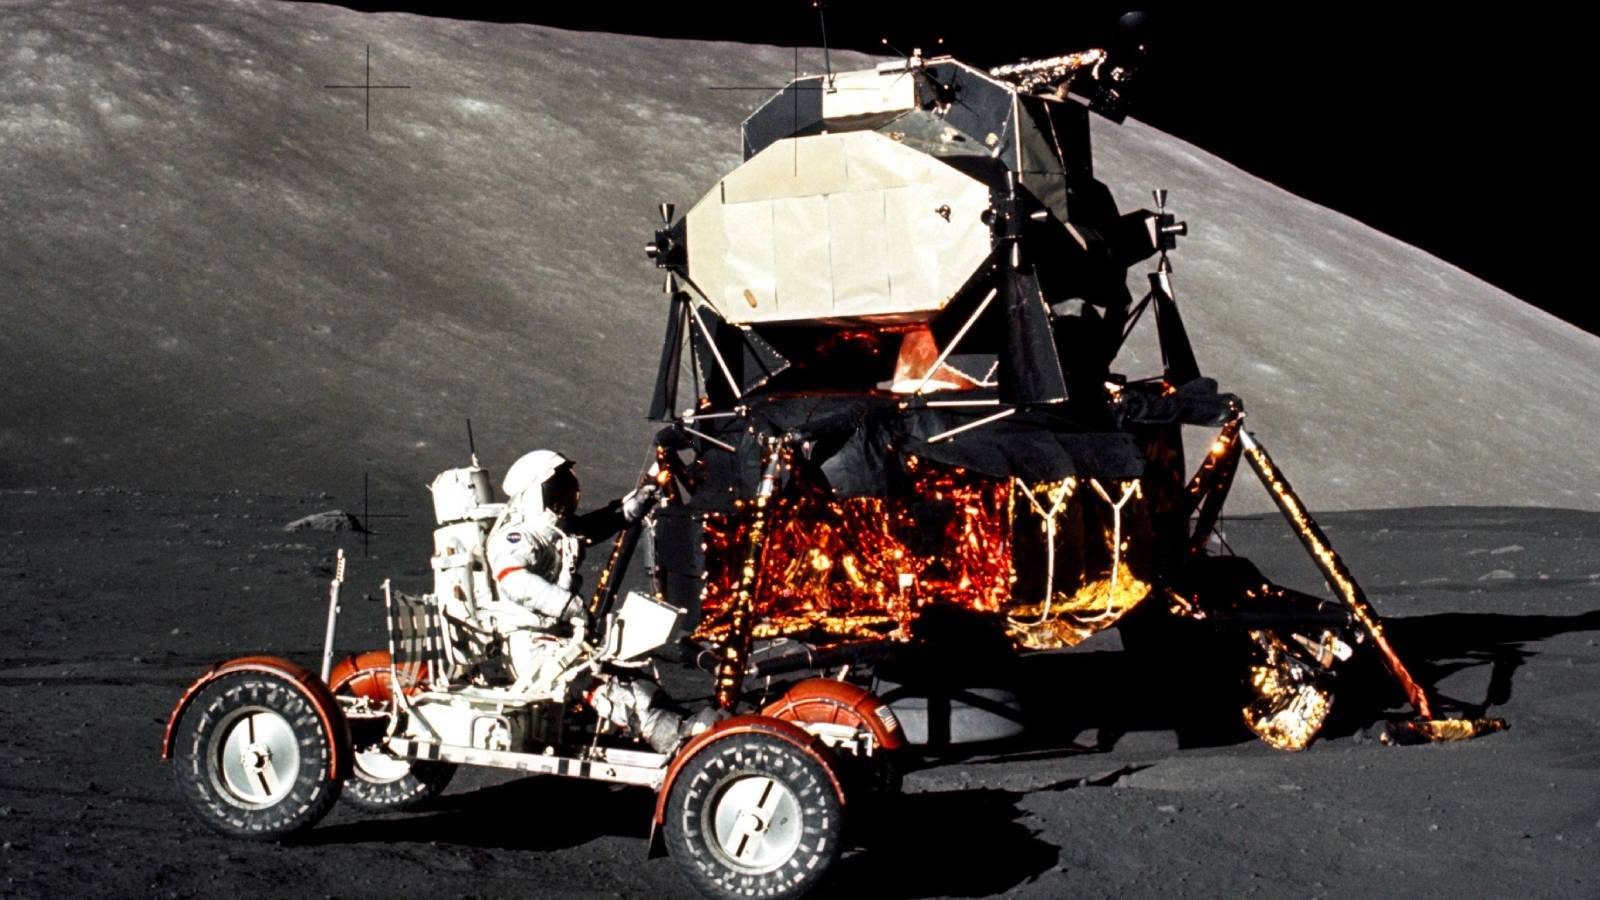 Apollo 17 abandoned on the lunar surface could cause an earthquake